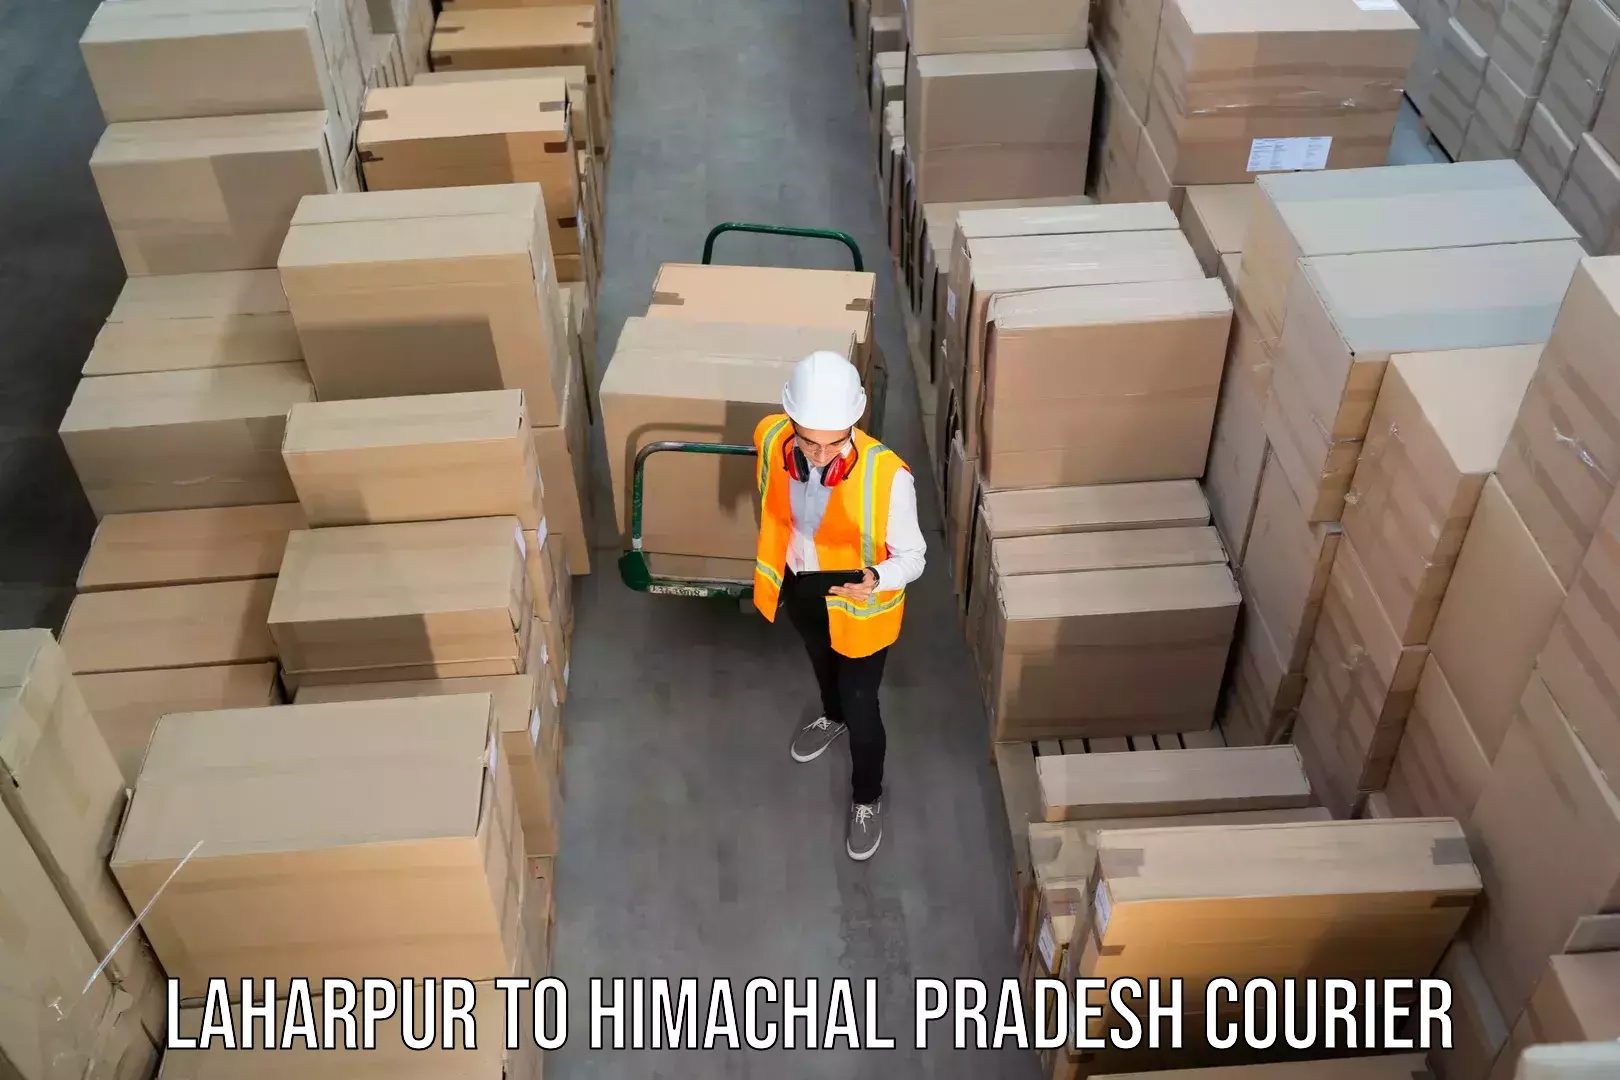 Express delivery capabilities Laharpur to Jubbal